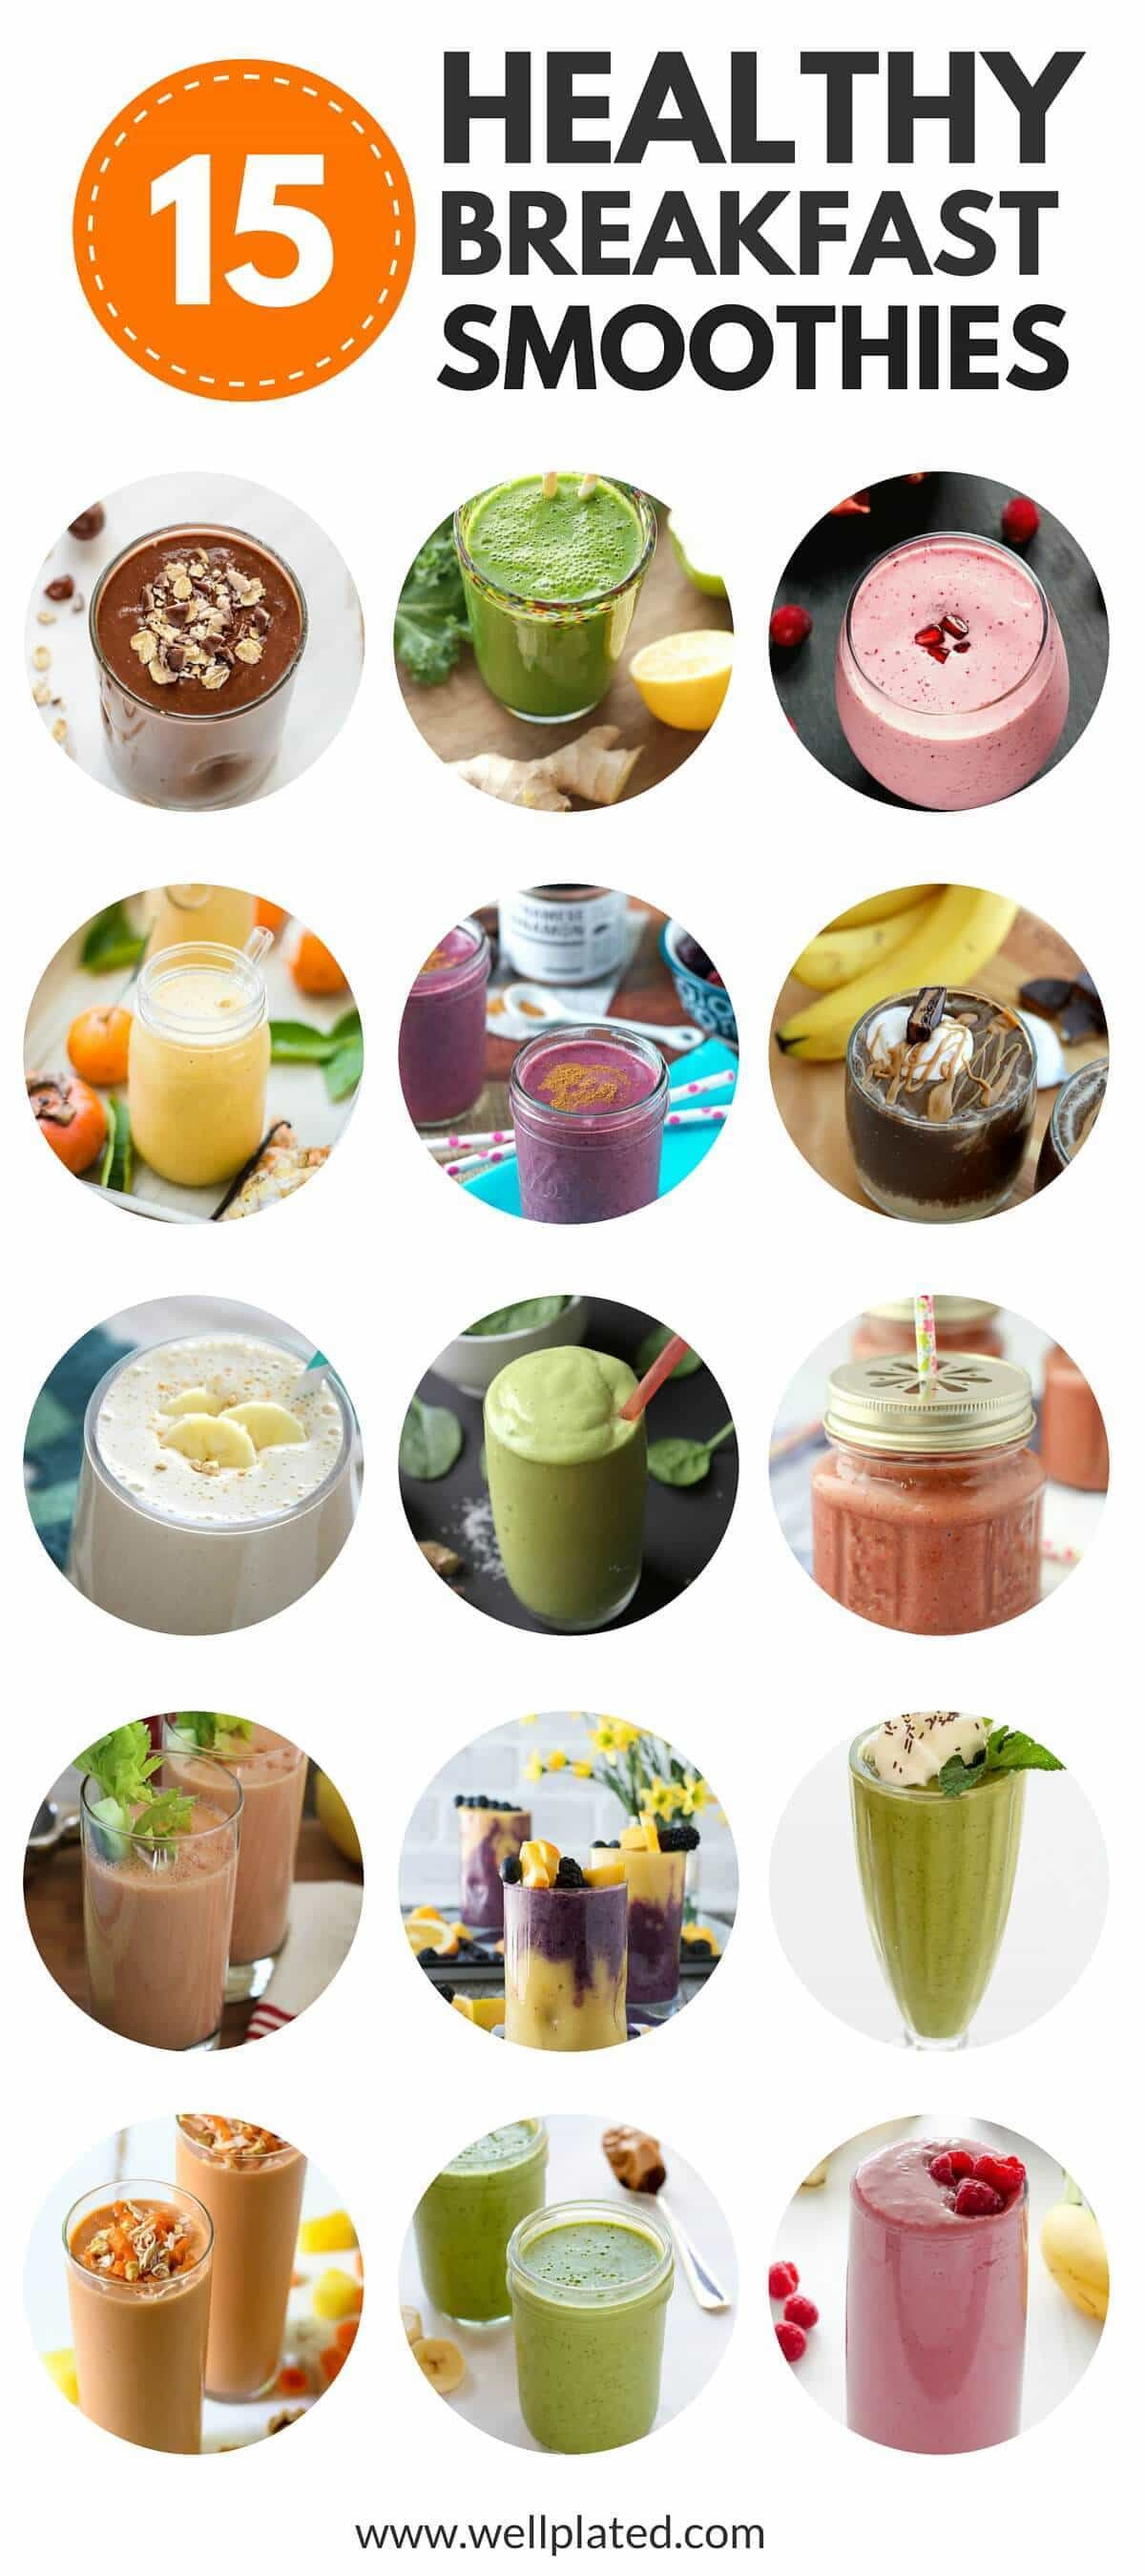 Healthy Smoothies For Breakfast
 The Best 15 Healthy Breakfast Smoothies